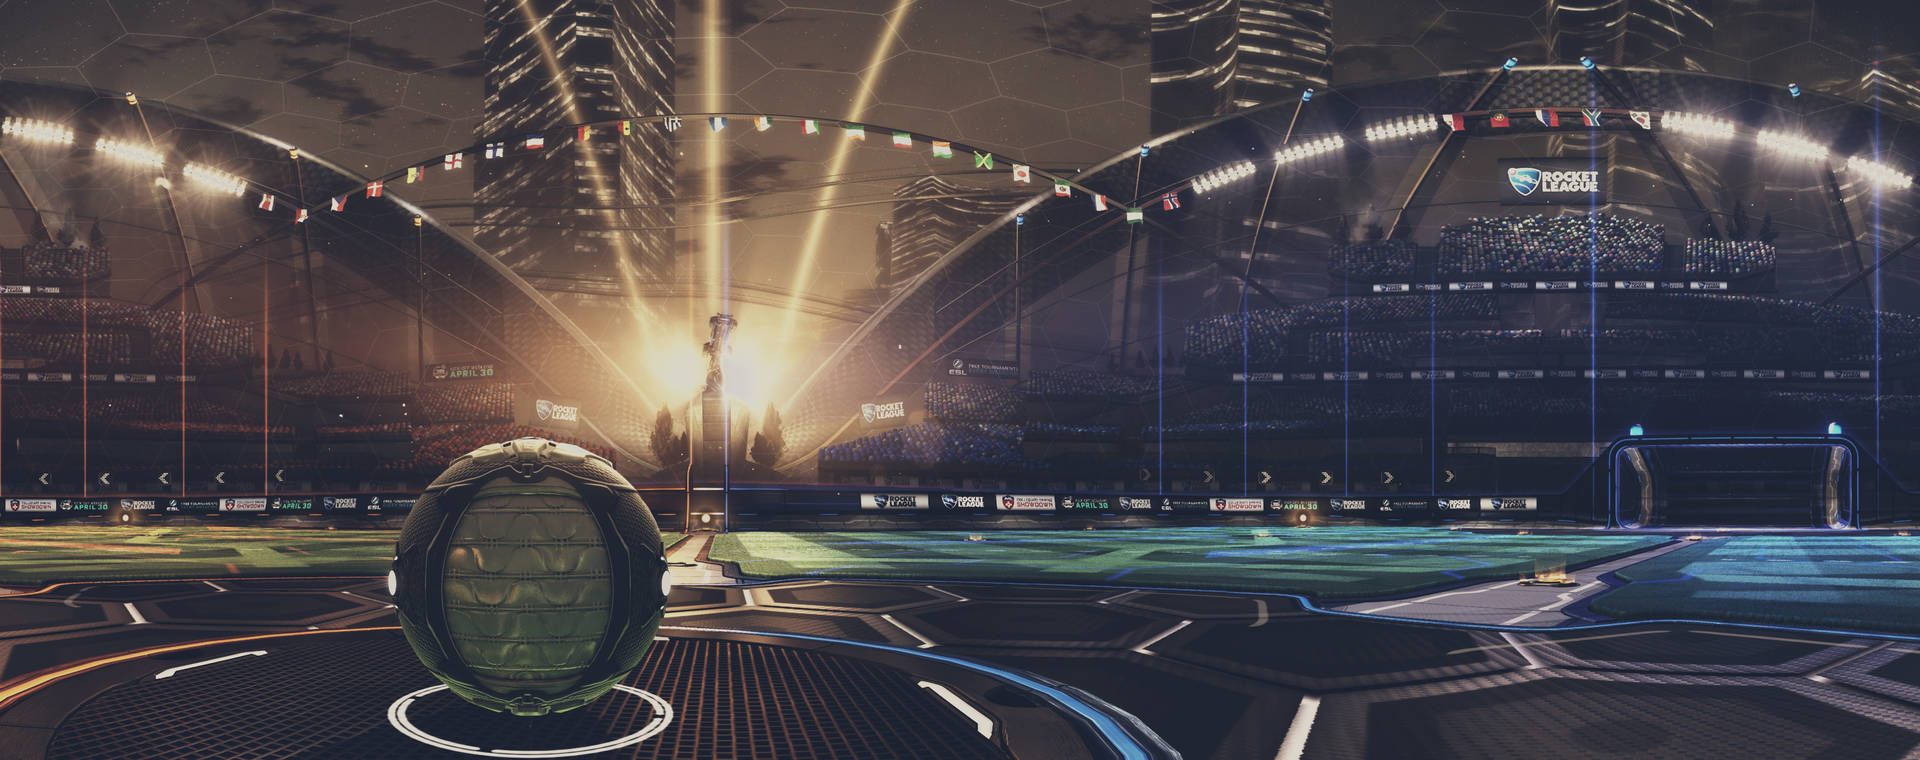 Cool Rocket League Ball In The Arena Wallpaper